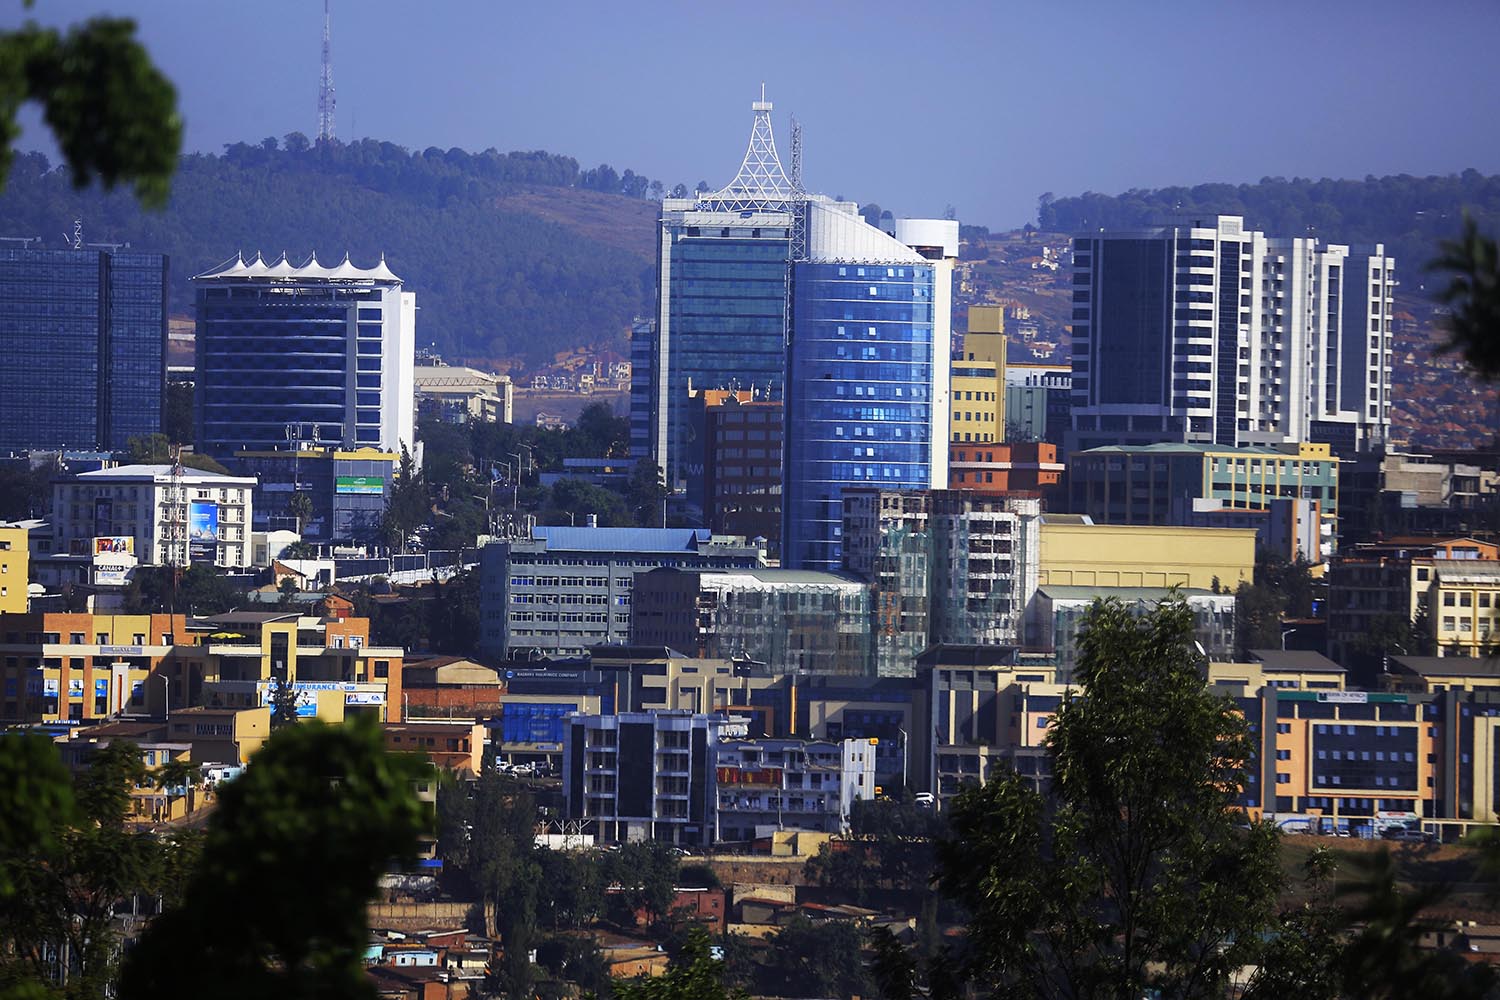 Downtown Kigali. The 10 per cent growth in industry sector was mainly mainly driven by manufacturing and construction activities. Sam Ngendahimana.